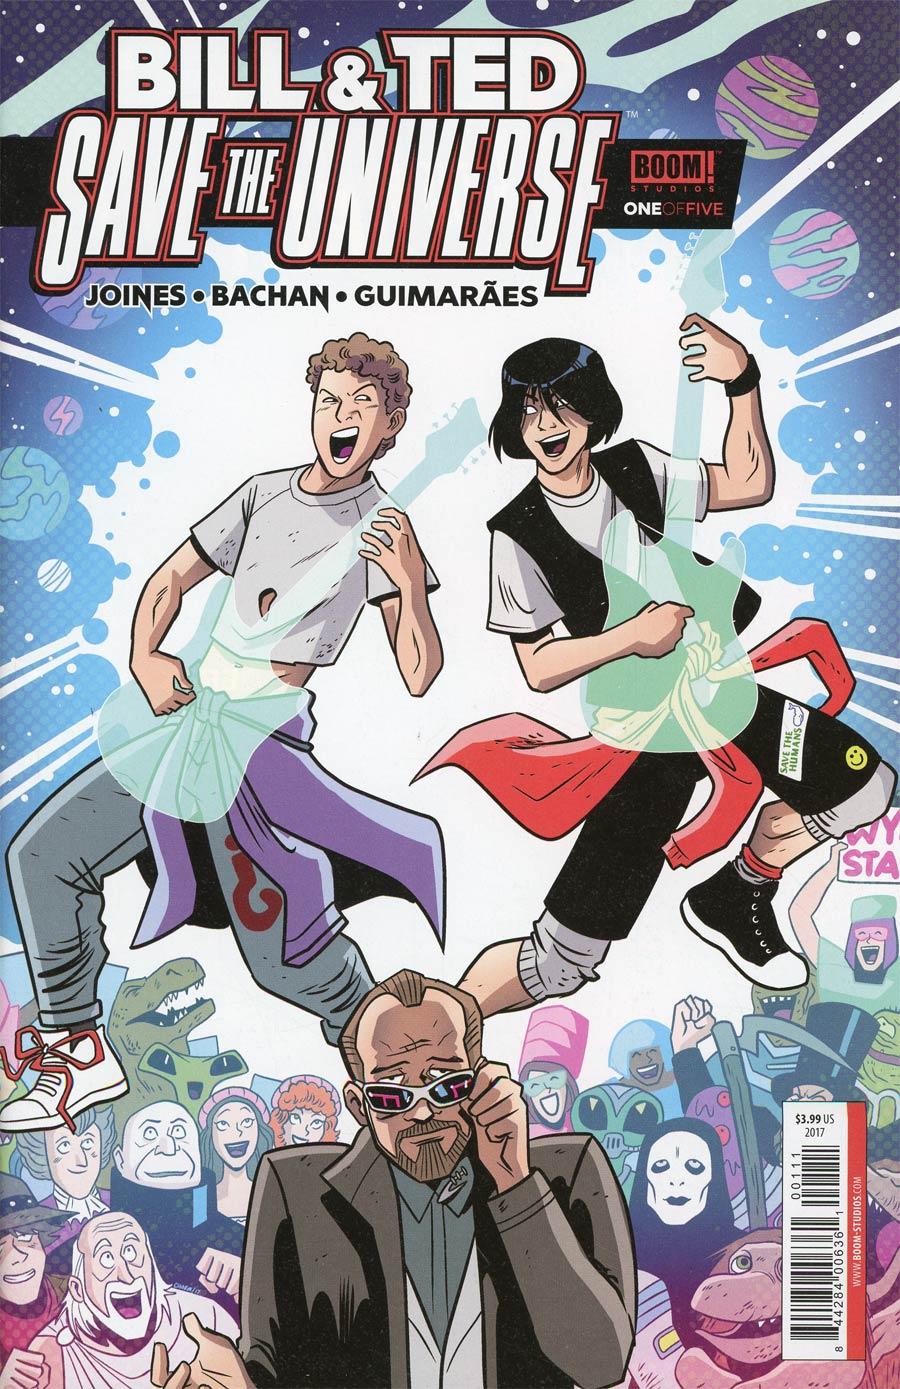 Bill & Ted Save The Universe Vol. 1 #1